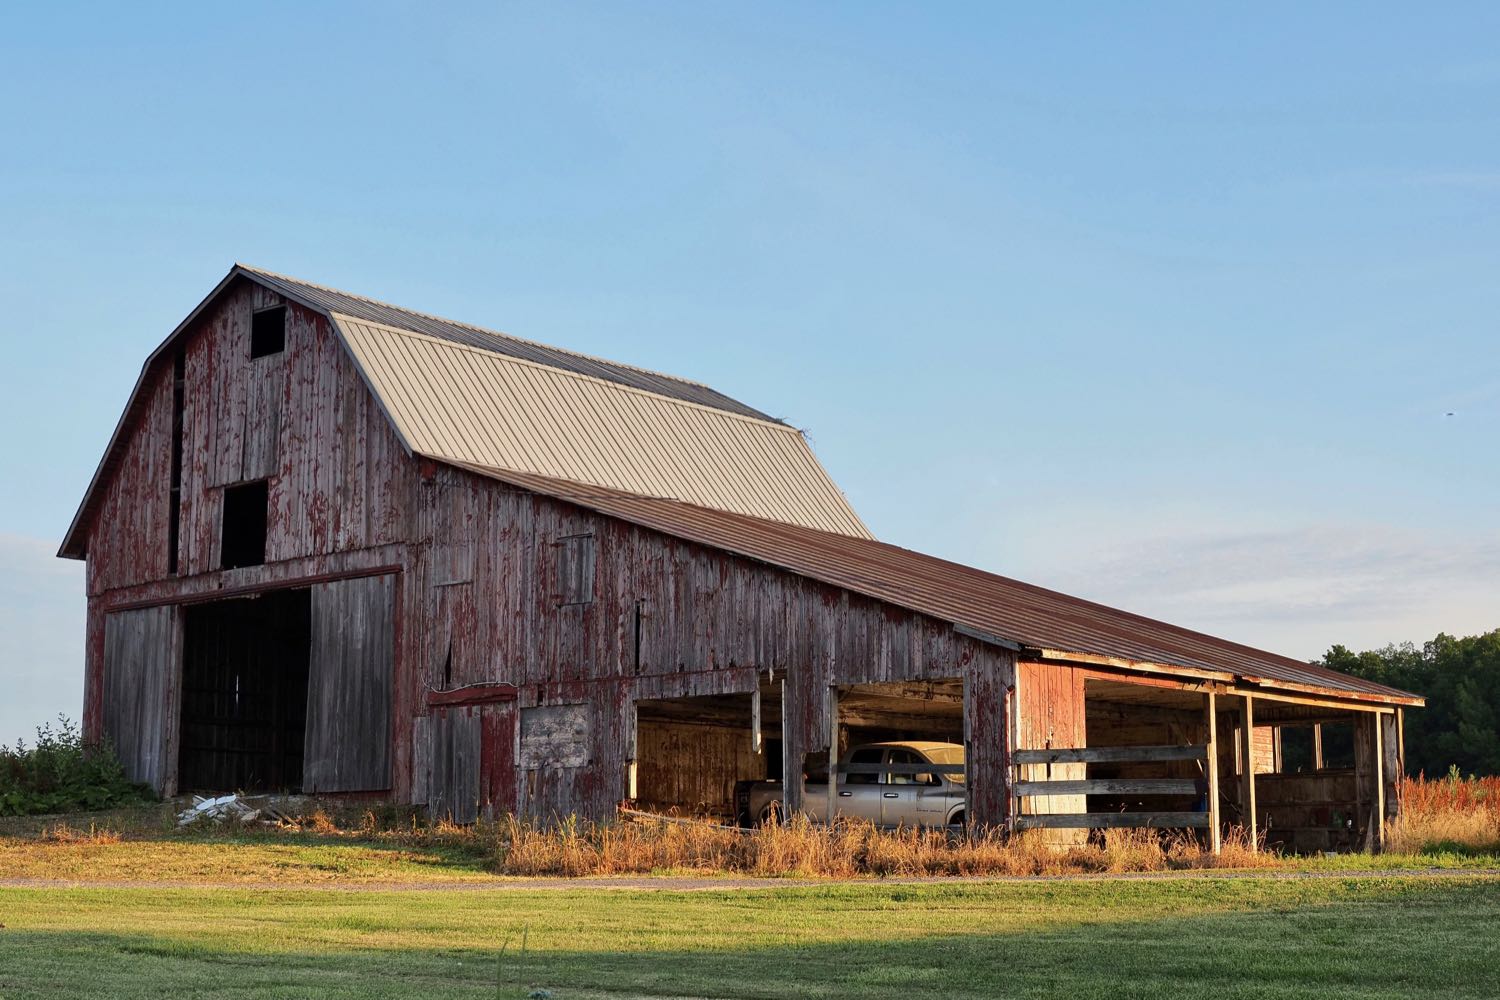 An old barn, weathered wood, faded and peeling red paint, metal roof, in morning light.